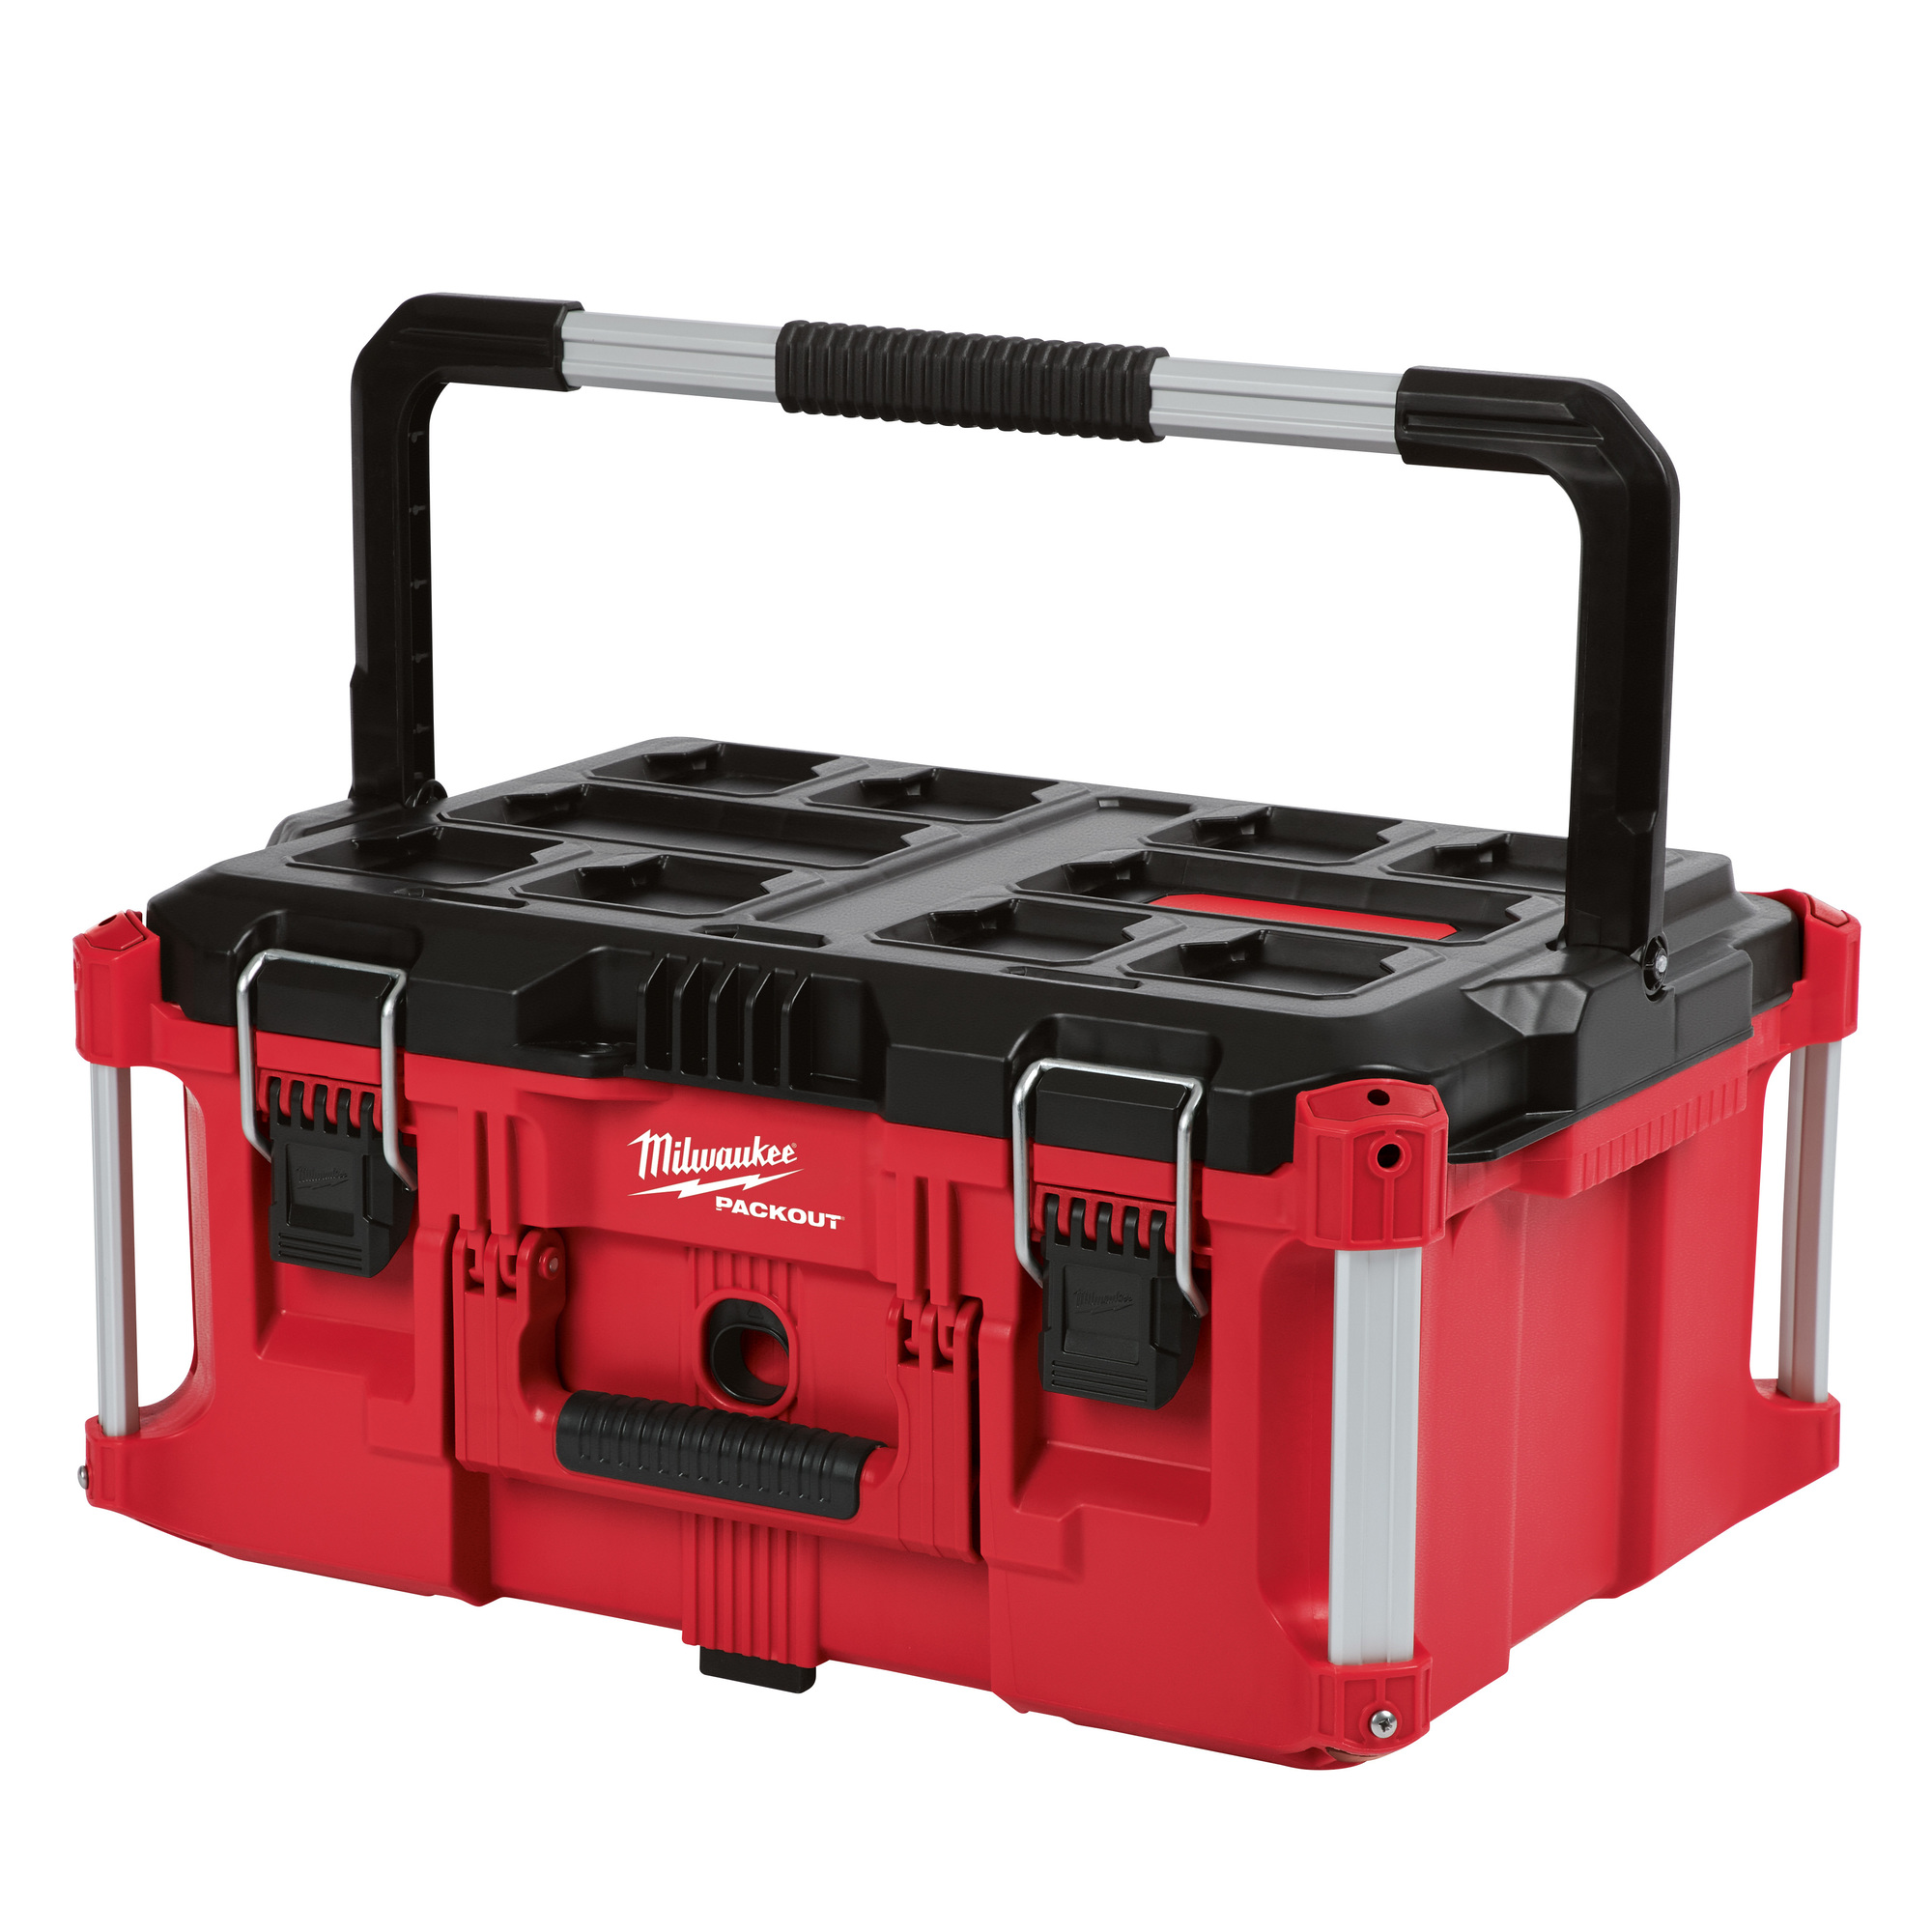 Milwaukee Packout Large Toolbox, 22.1Inch L x 11.3Inch W x 16.1Inch H, Model 48-22-8425